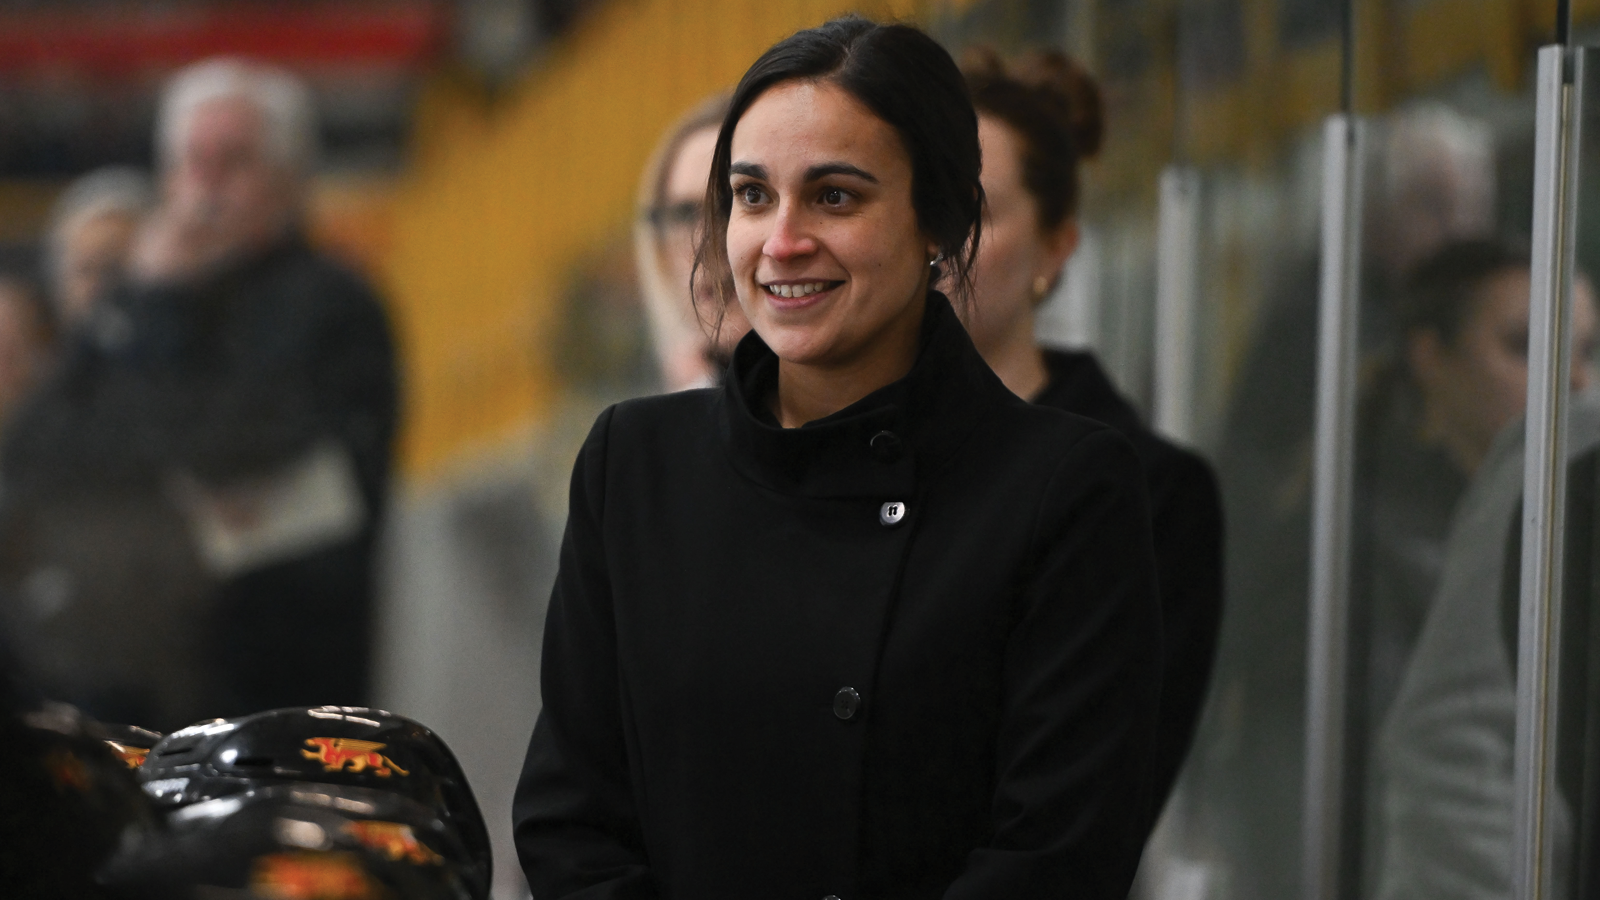 Guelph women's hockey coach Katie Mora standing behind the bench during a game